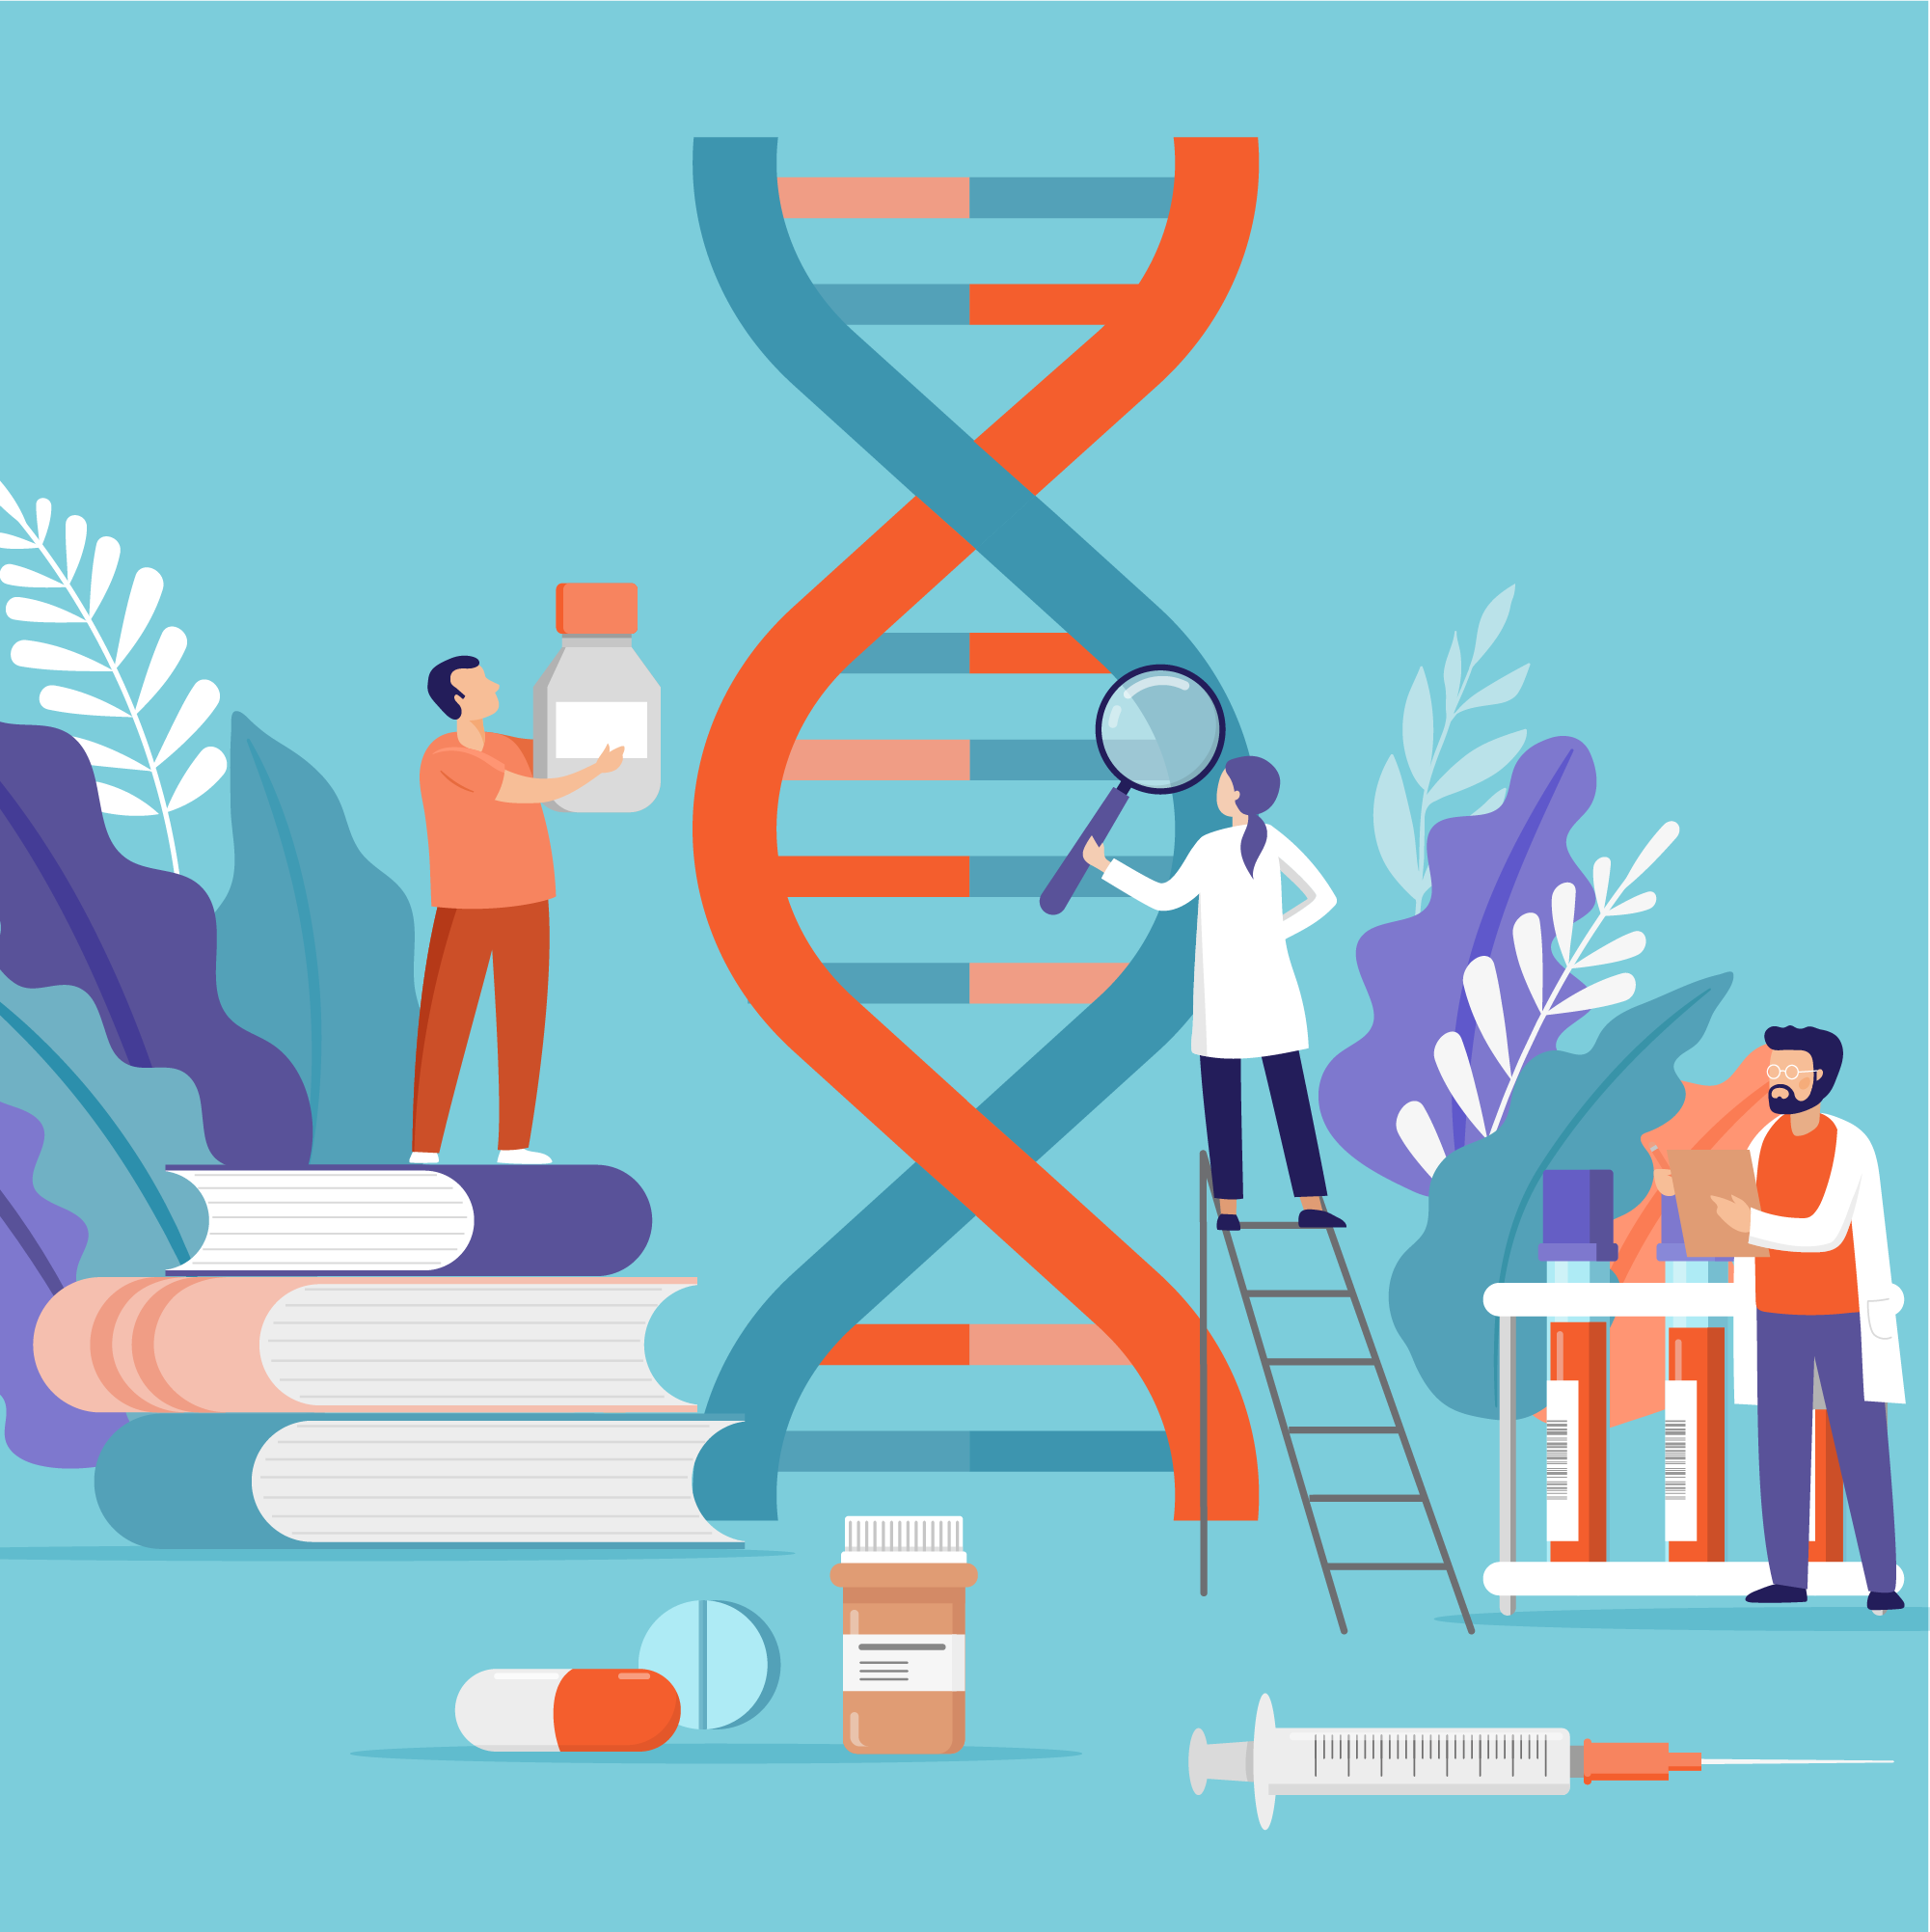 Vector art showing three researchers examining a double helix while holding prescription bottles.